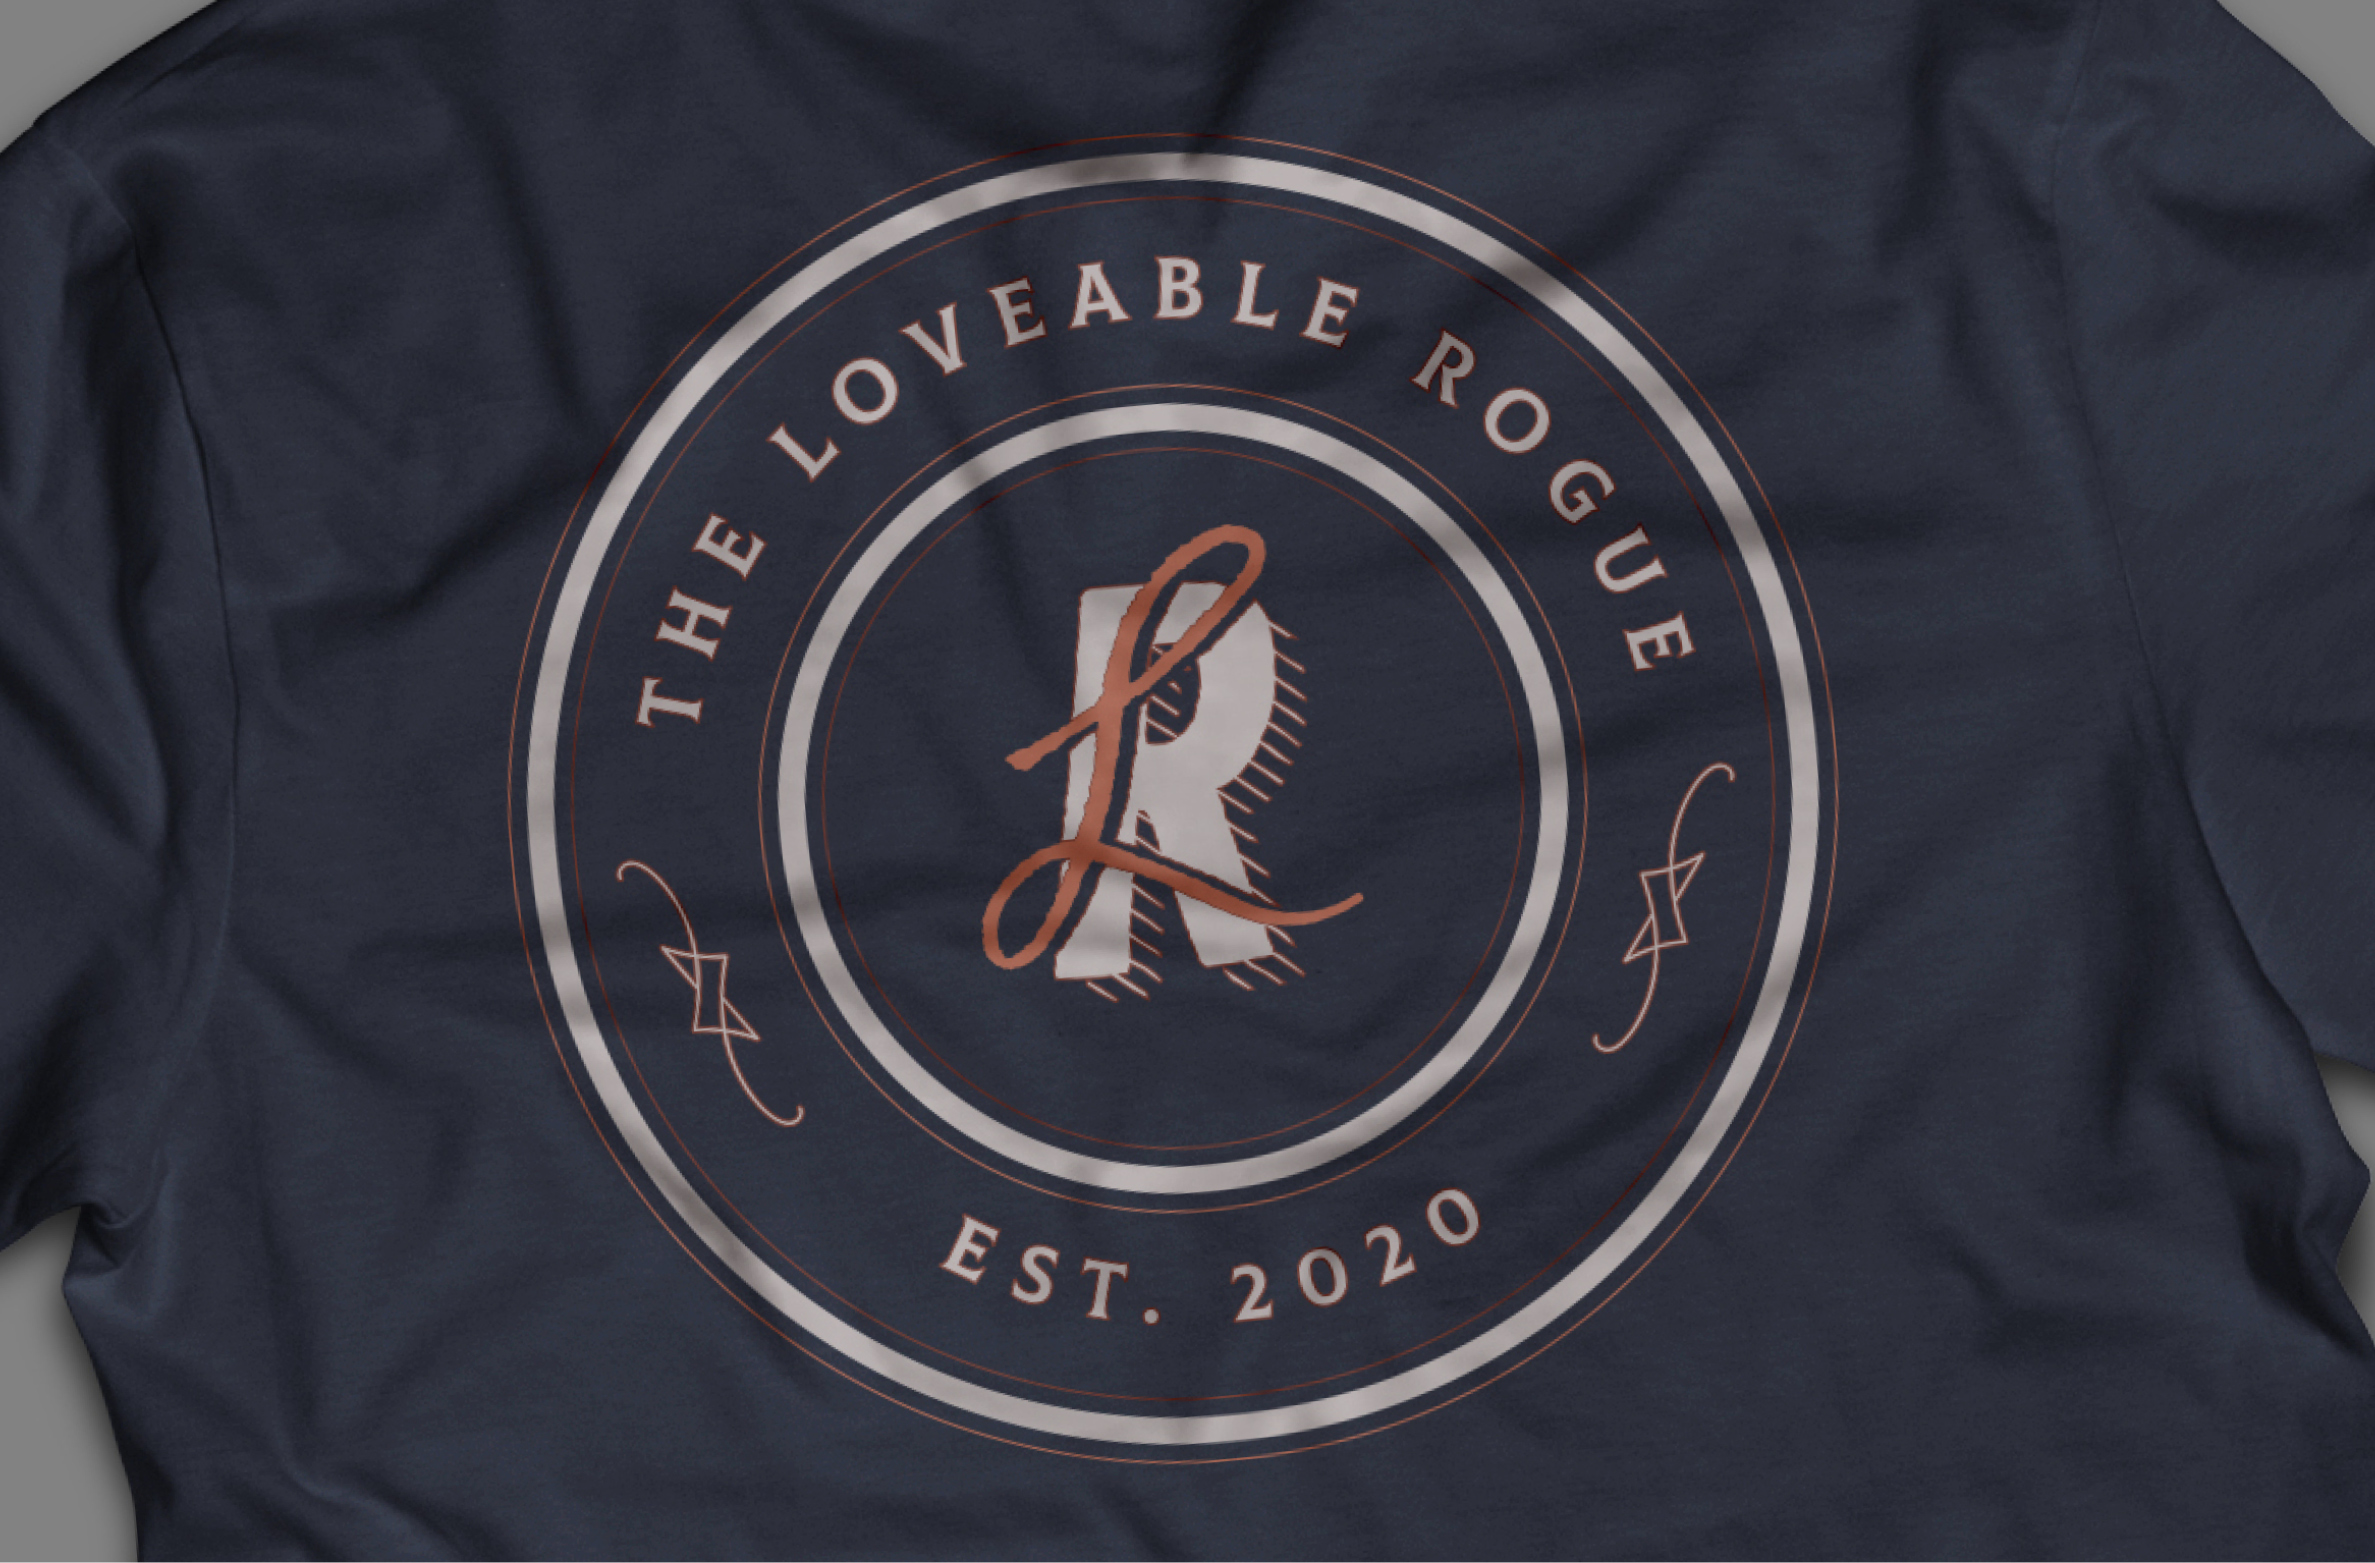 The Loveable Rogue Branding